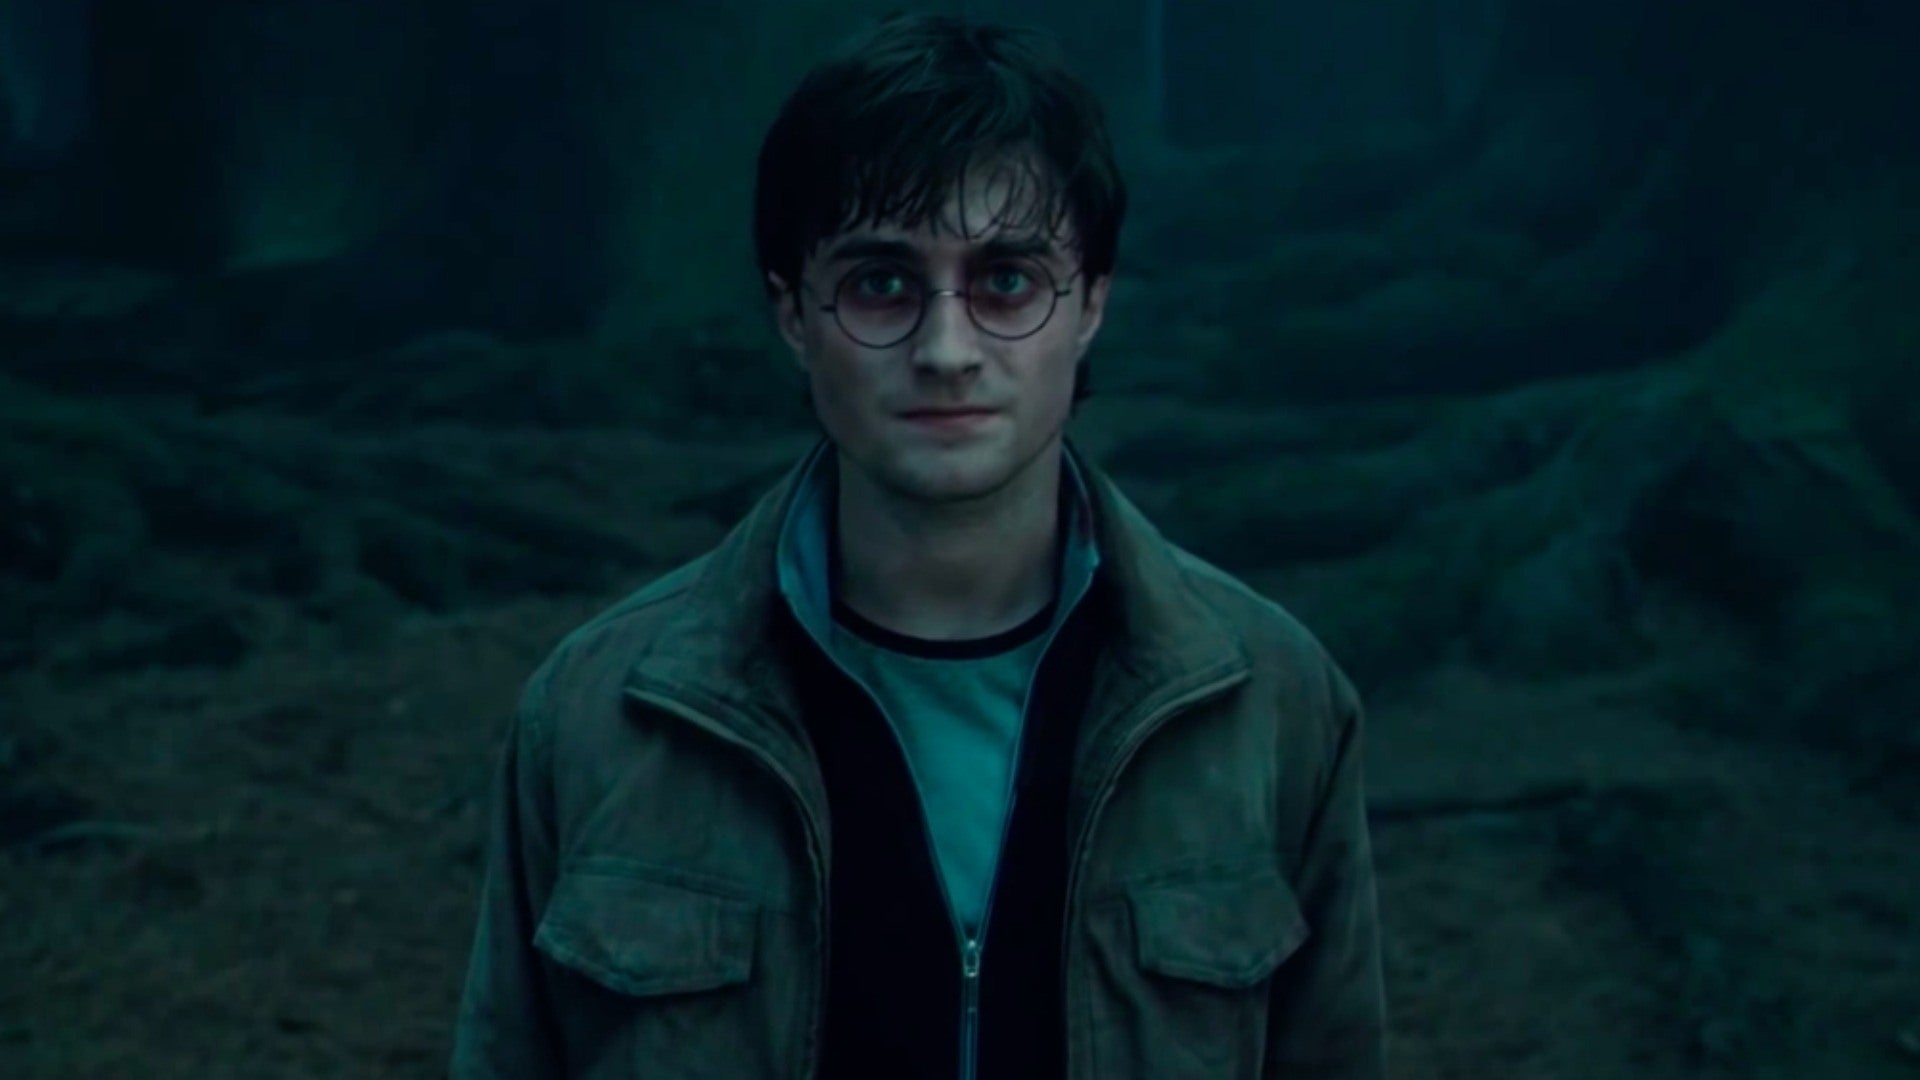 Harry Potter, Deathly Hallows, Movies, IGN review, 1920x1080 Full HD Desktop